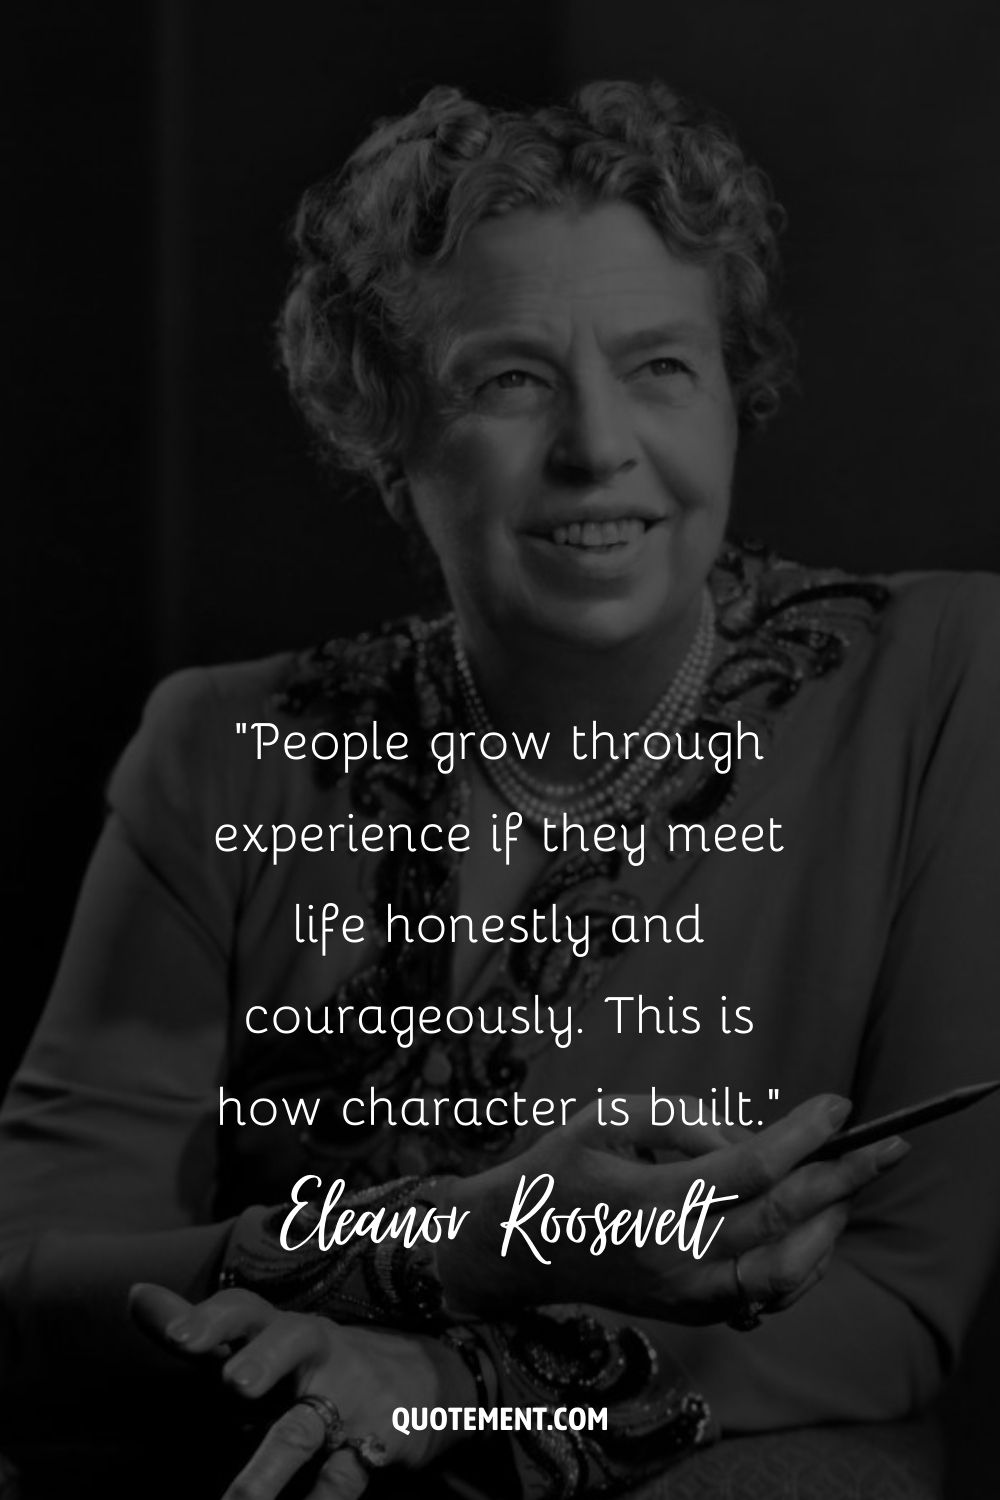 People grow through experience if they meet life honestly and courageously.